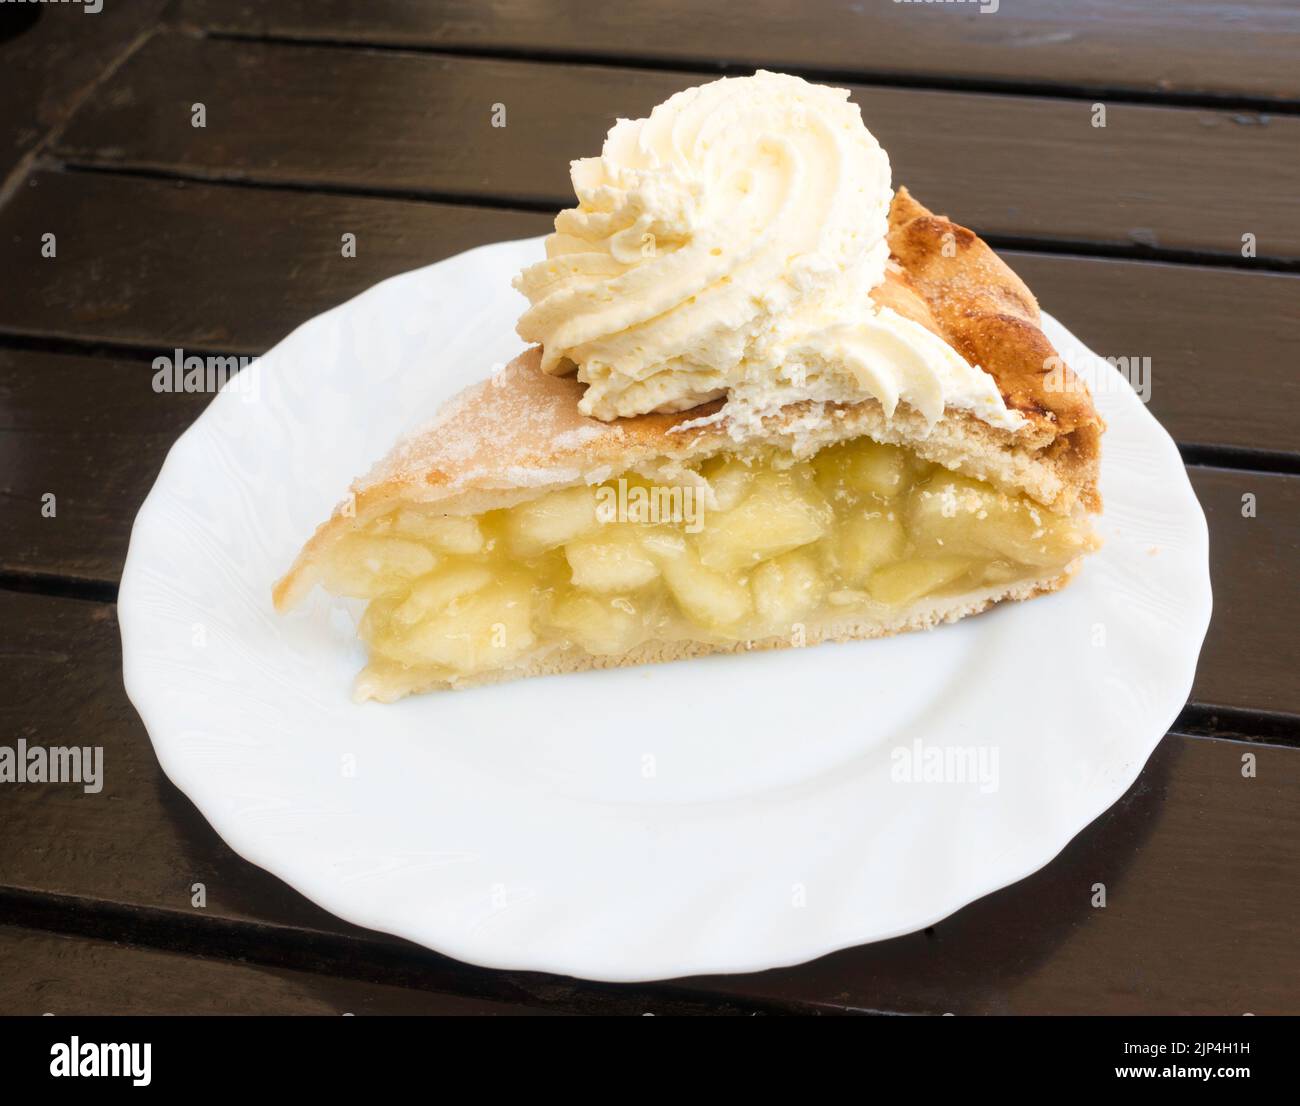 A slice of apple pie with cream on a white plate. Stock Photo